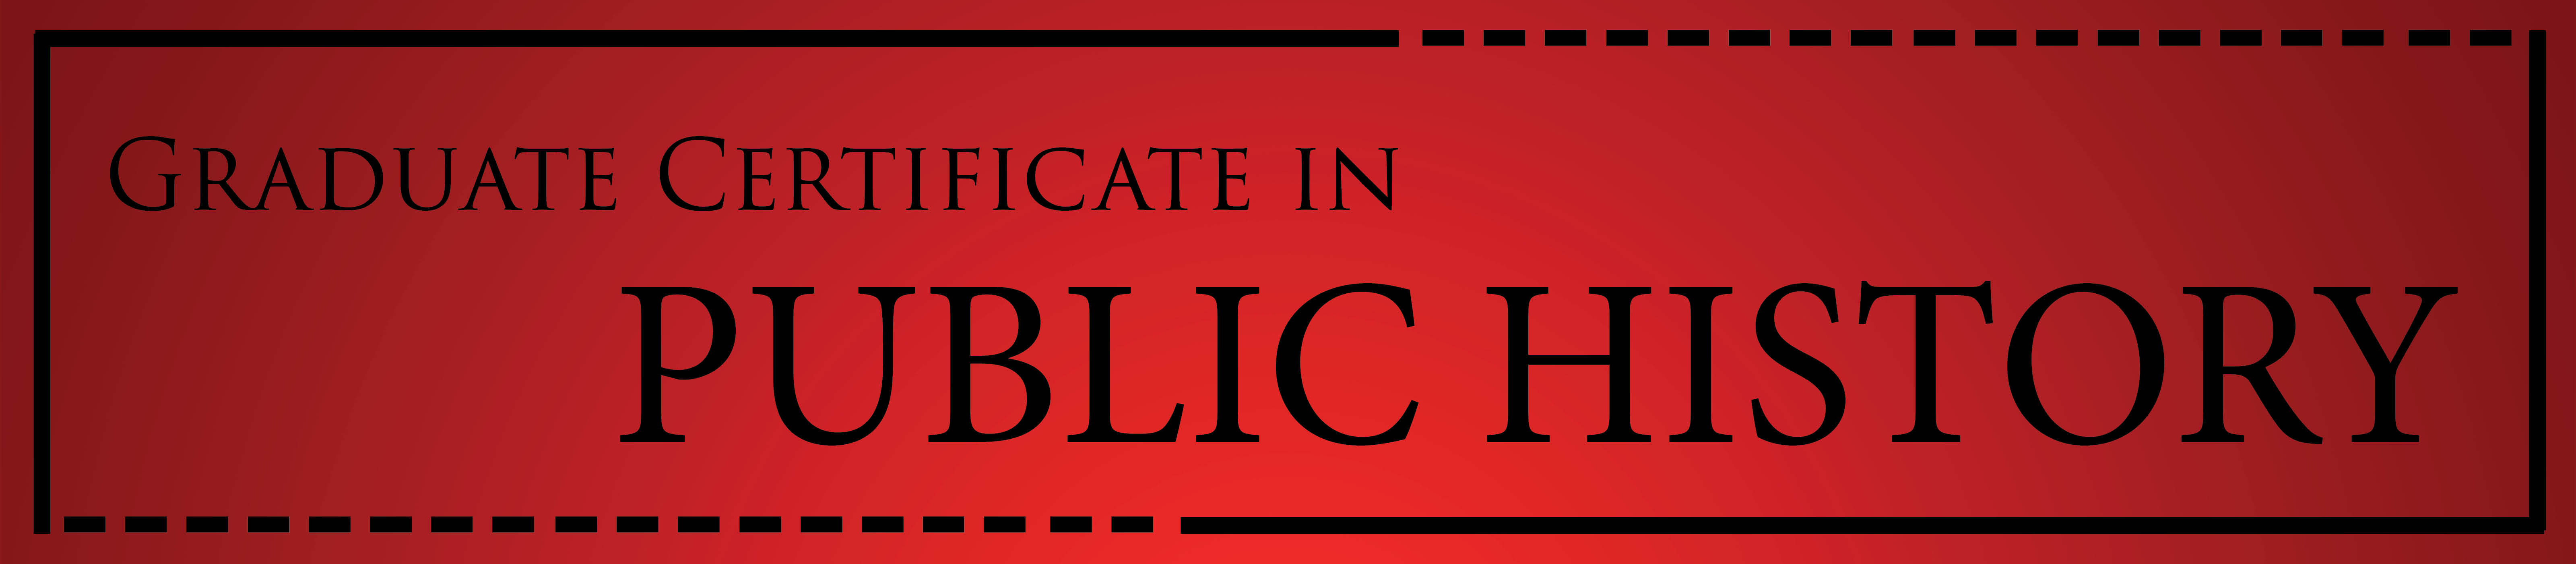 Graduate Certificate in Public History History Department The